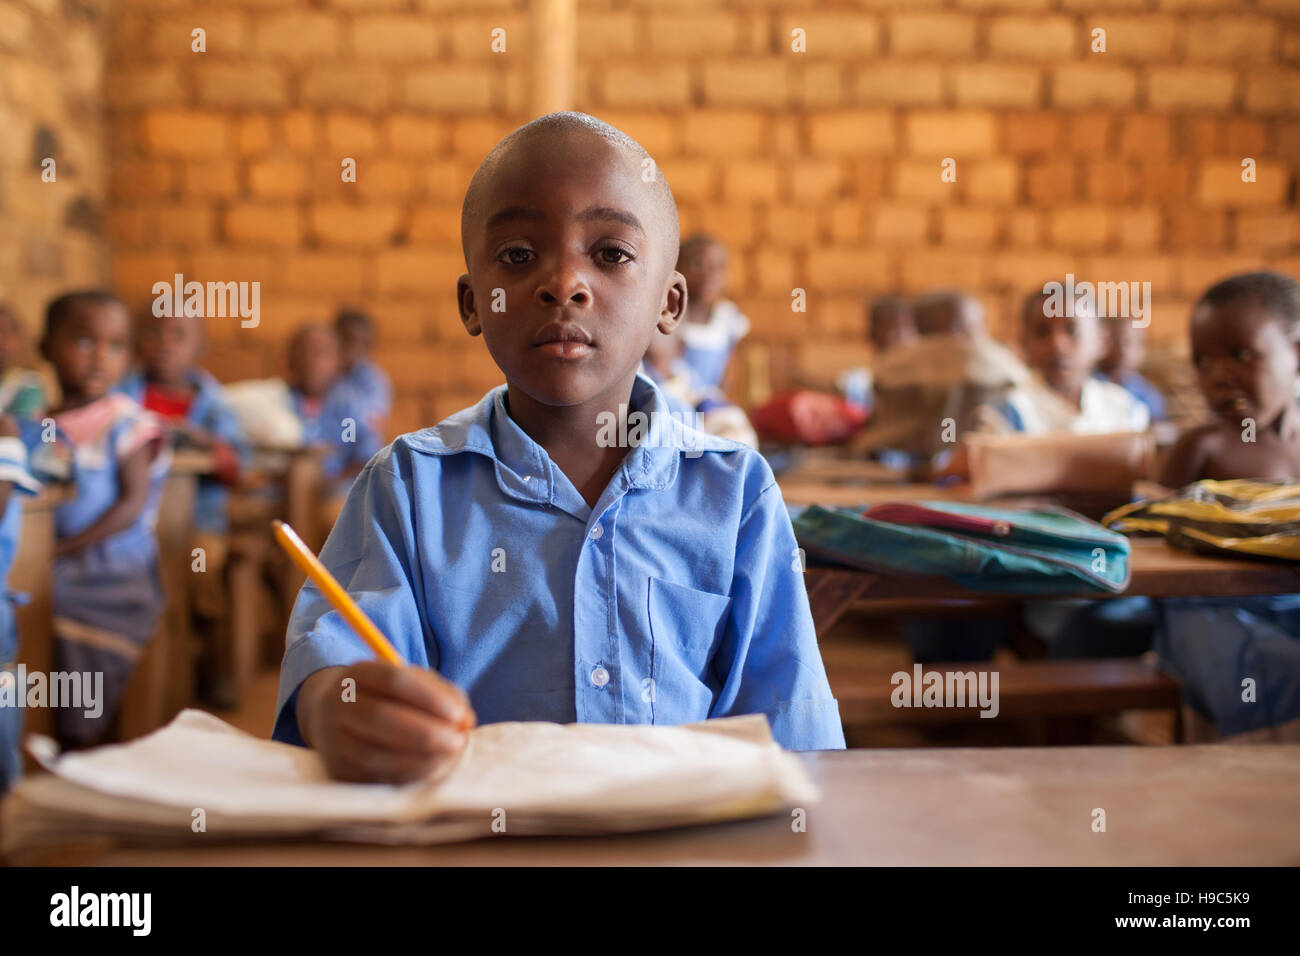 Young African school boy, 5-7 years old sitting in classroom Bambili Primary School, near Bamenda, Cameroon North West Africa. Stock Photo